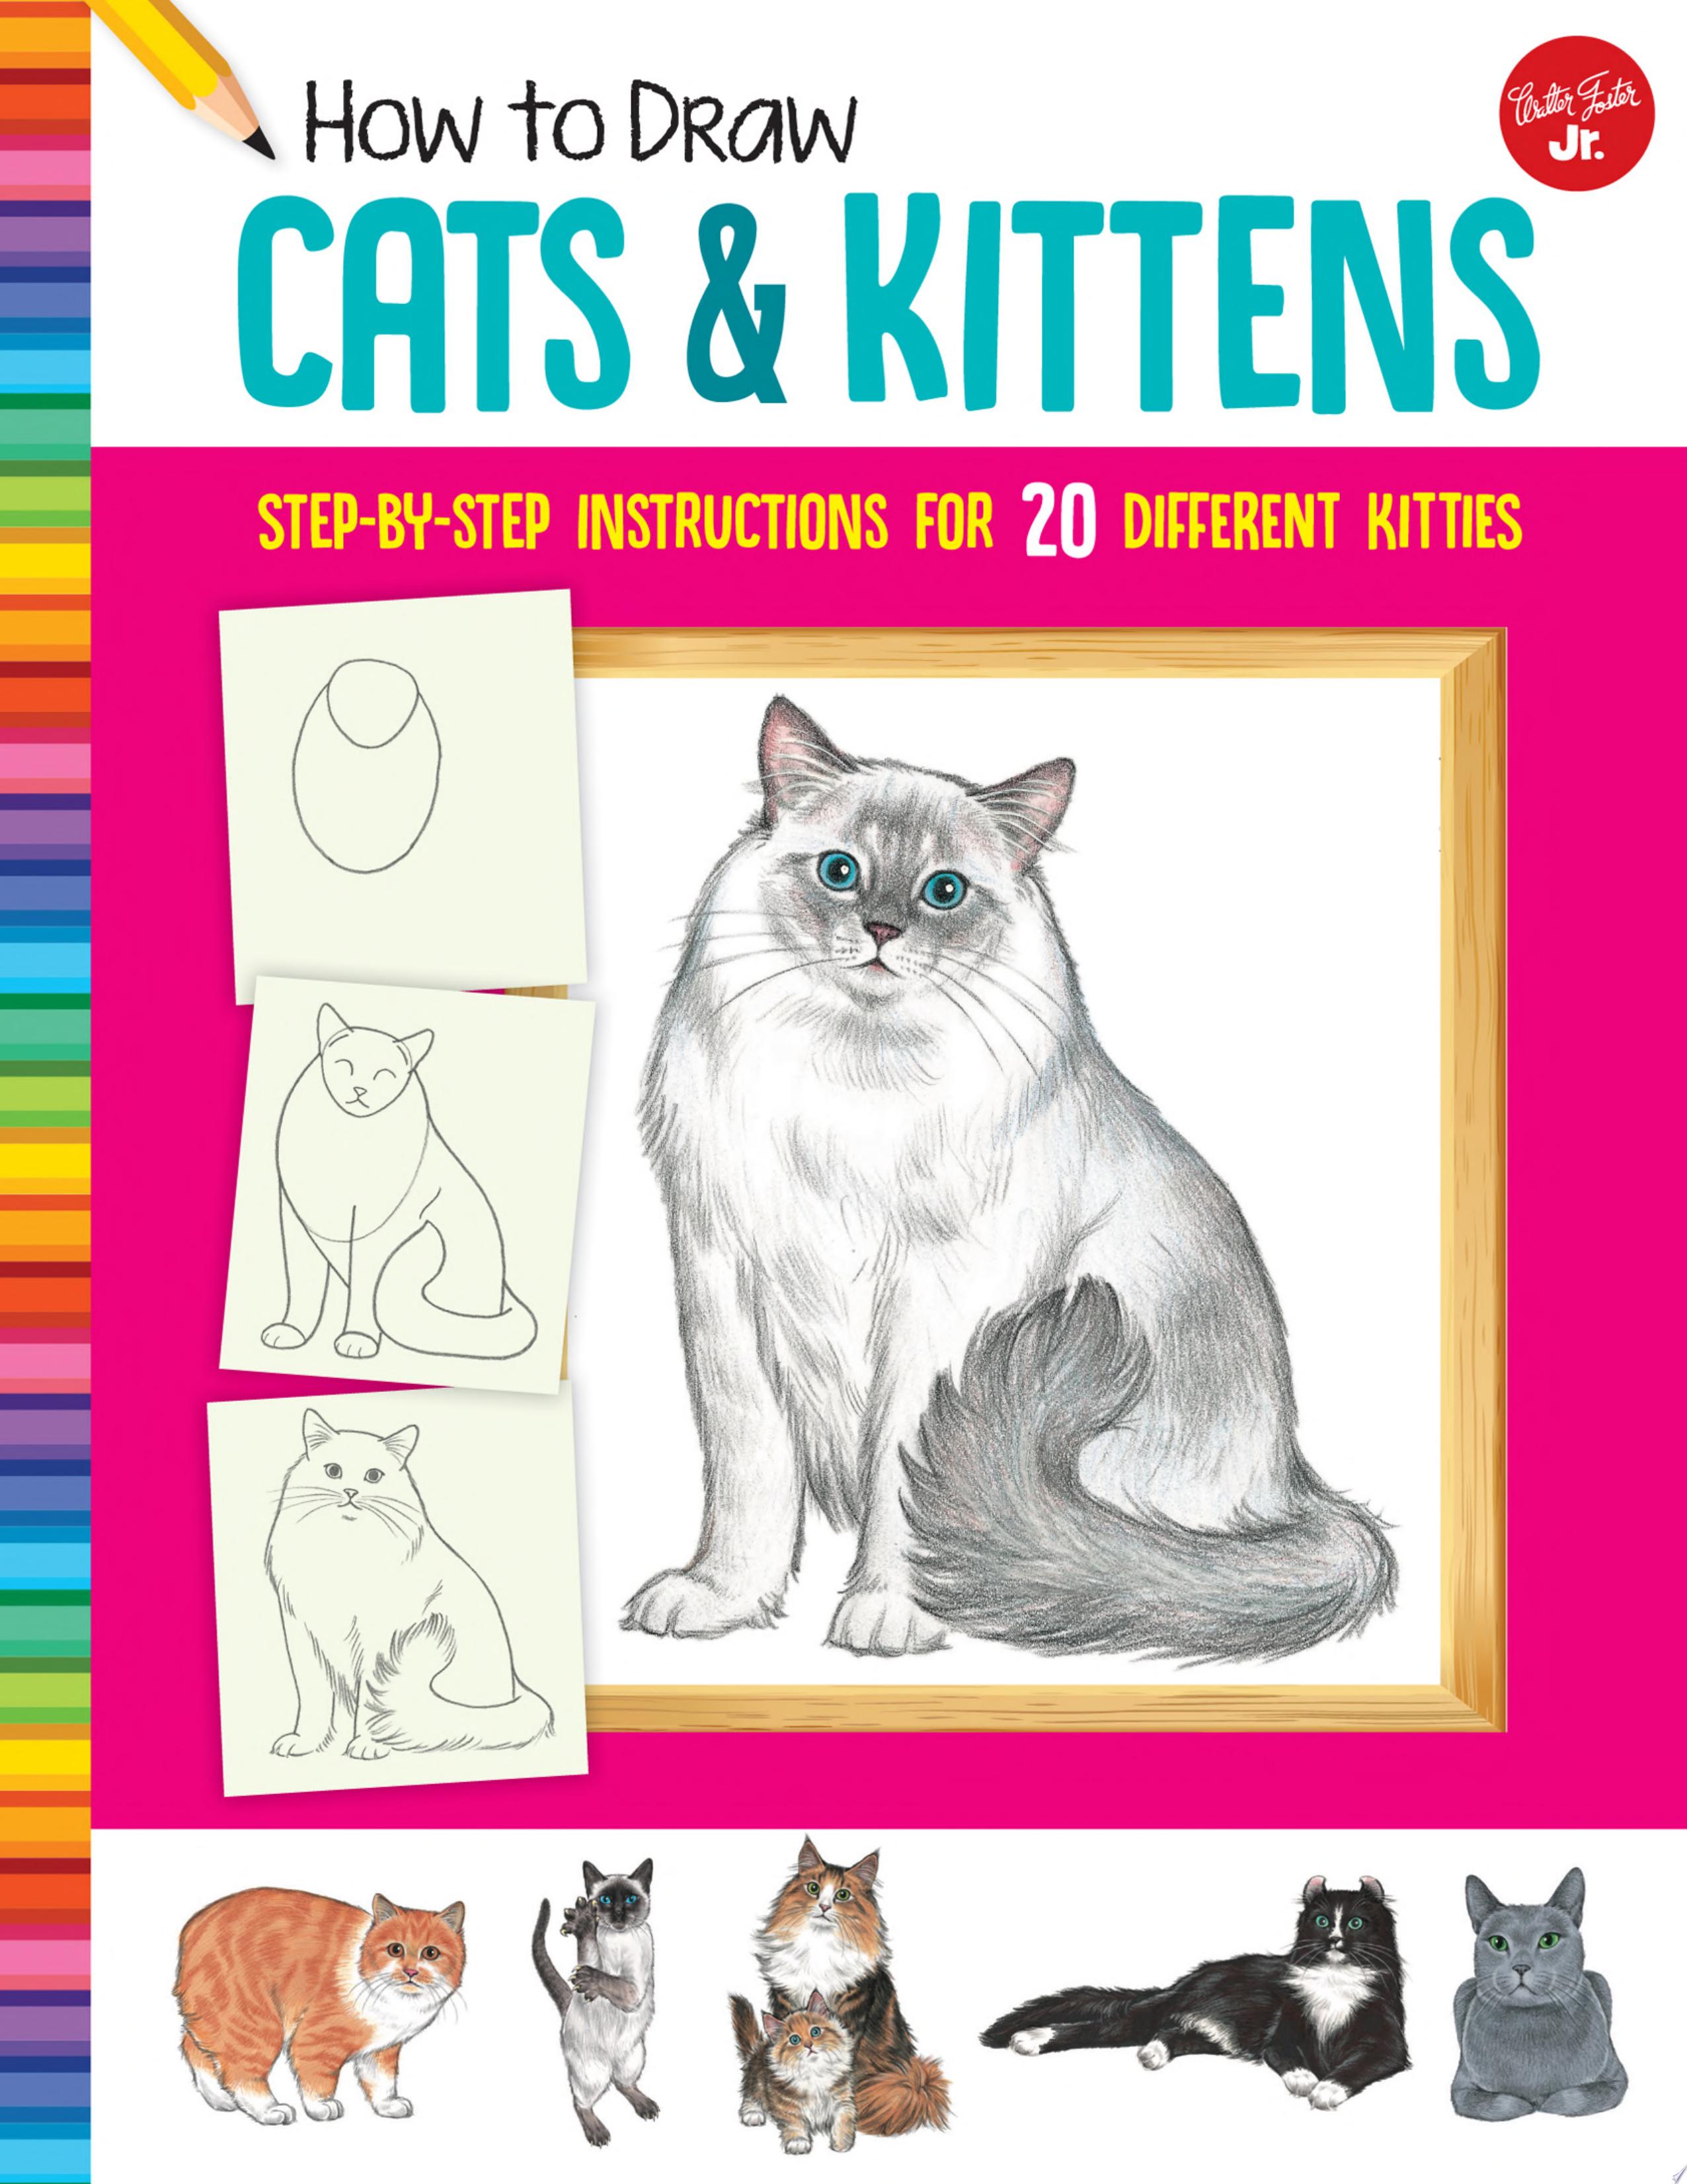 Image for "How to Draw Cats & Kittens"